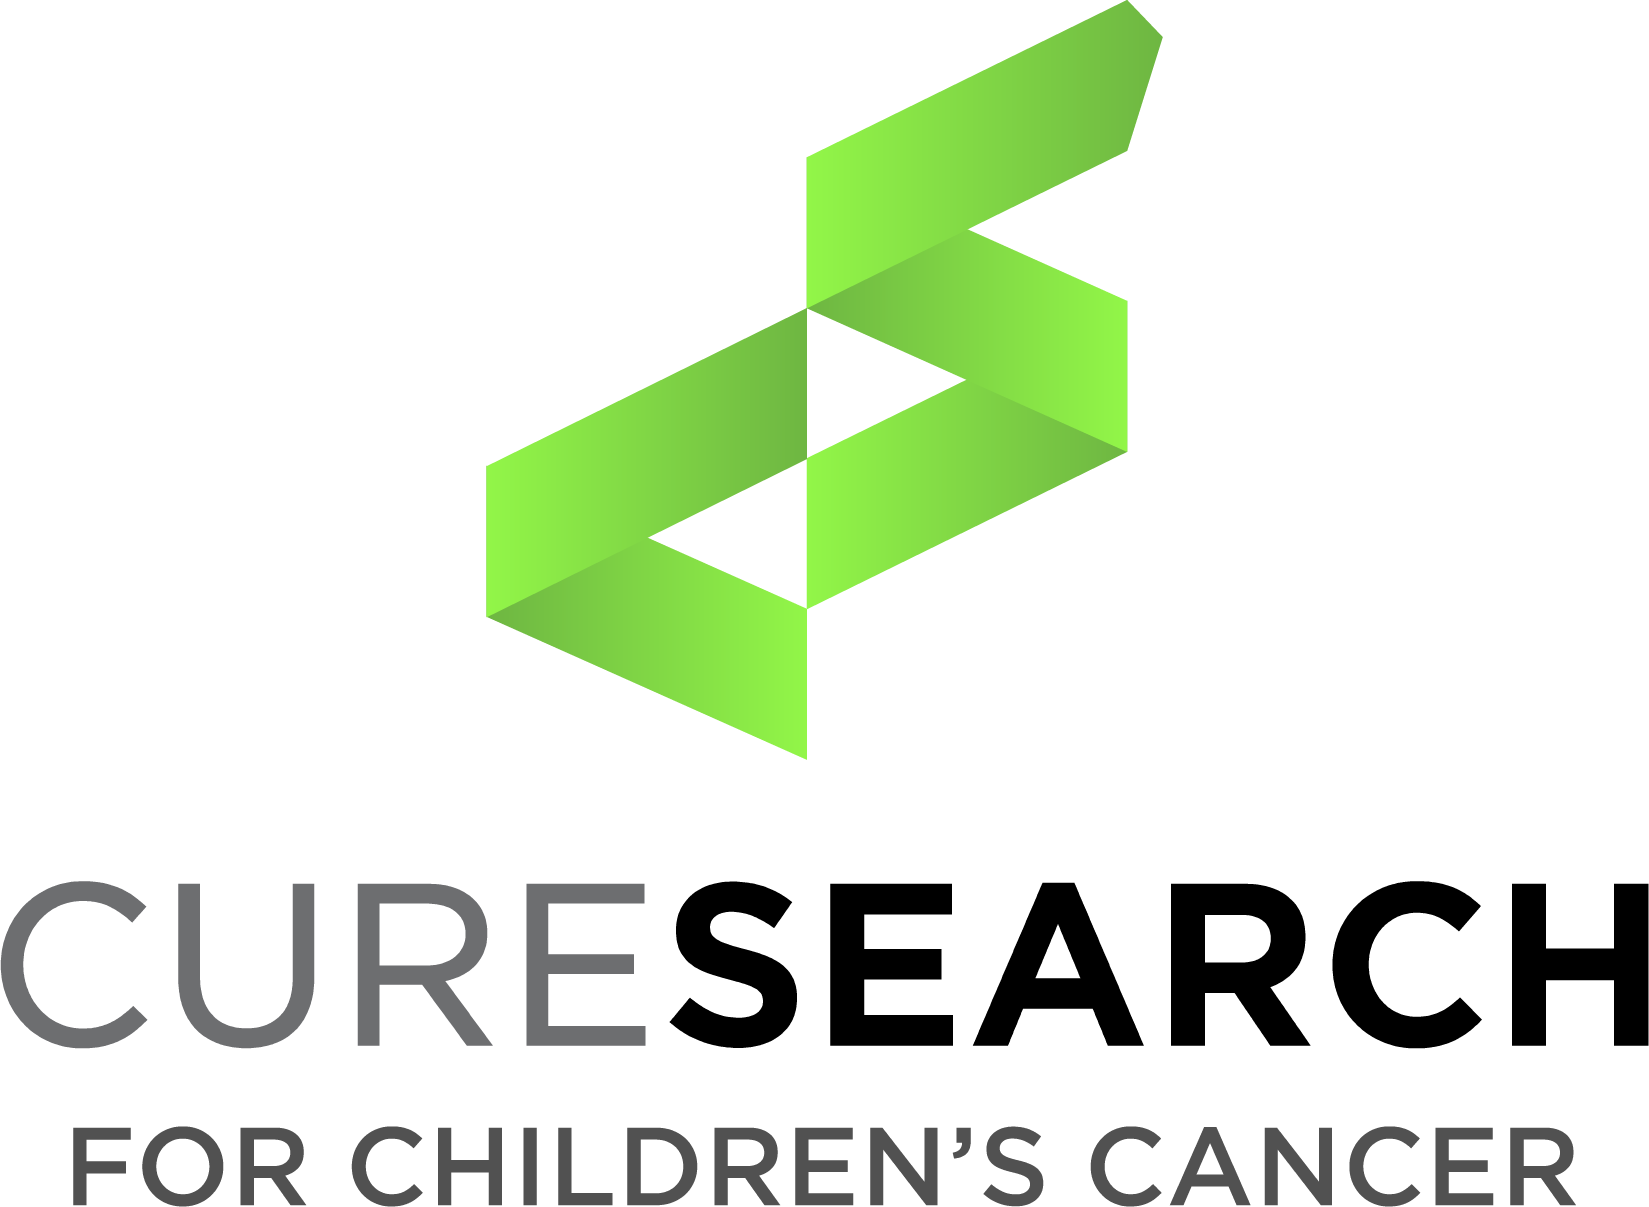 CureSearch for Children’s Cancer